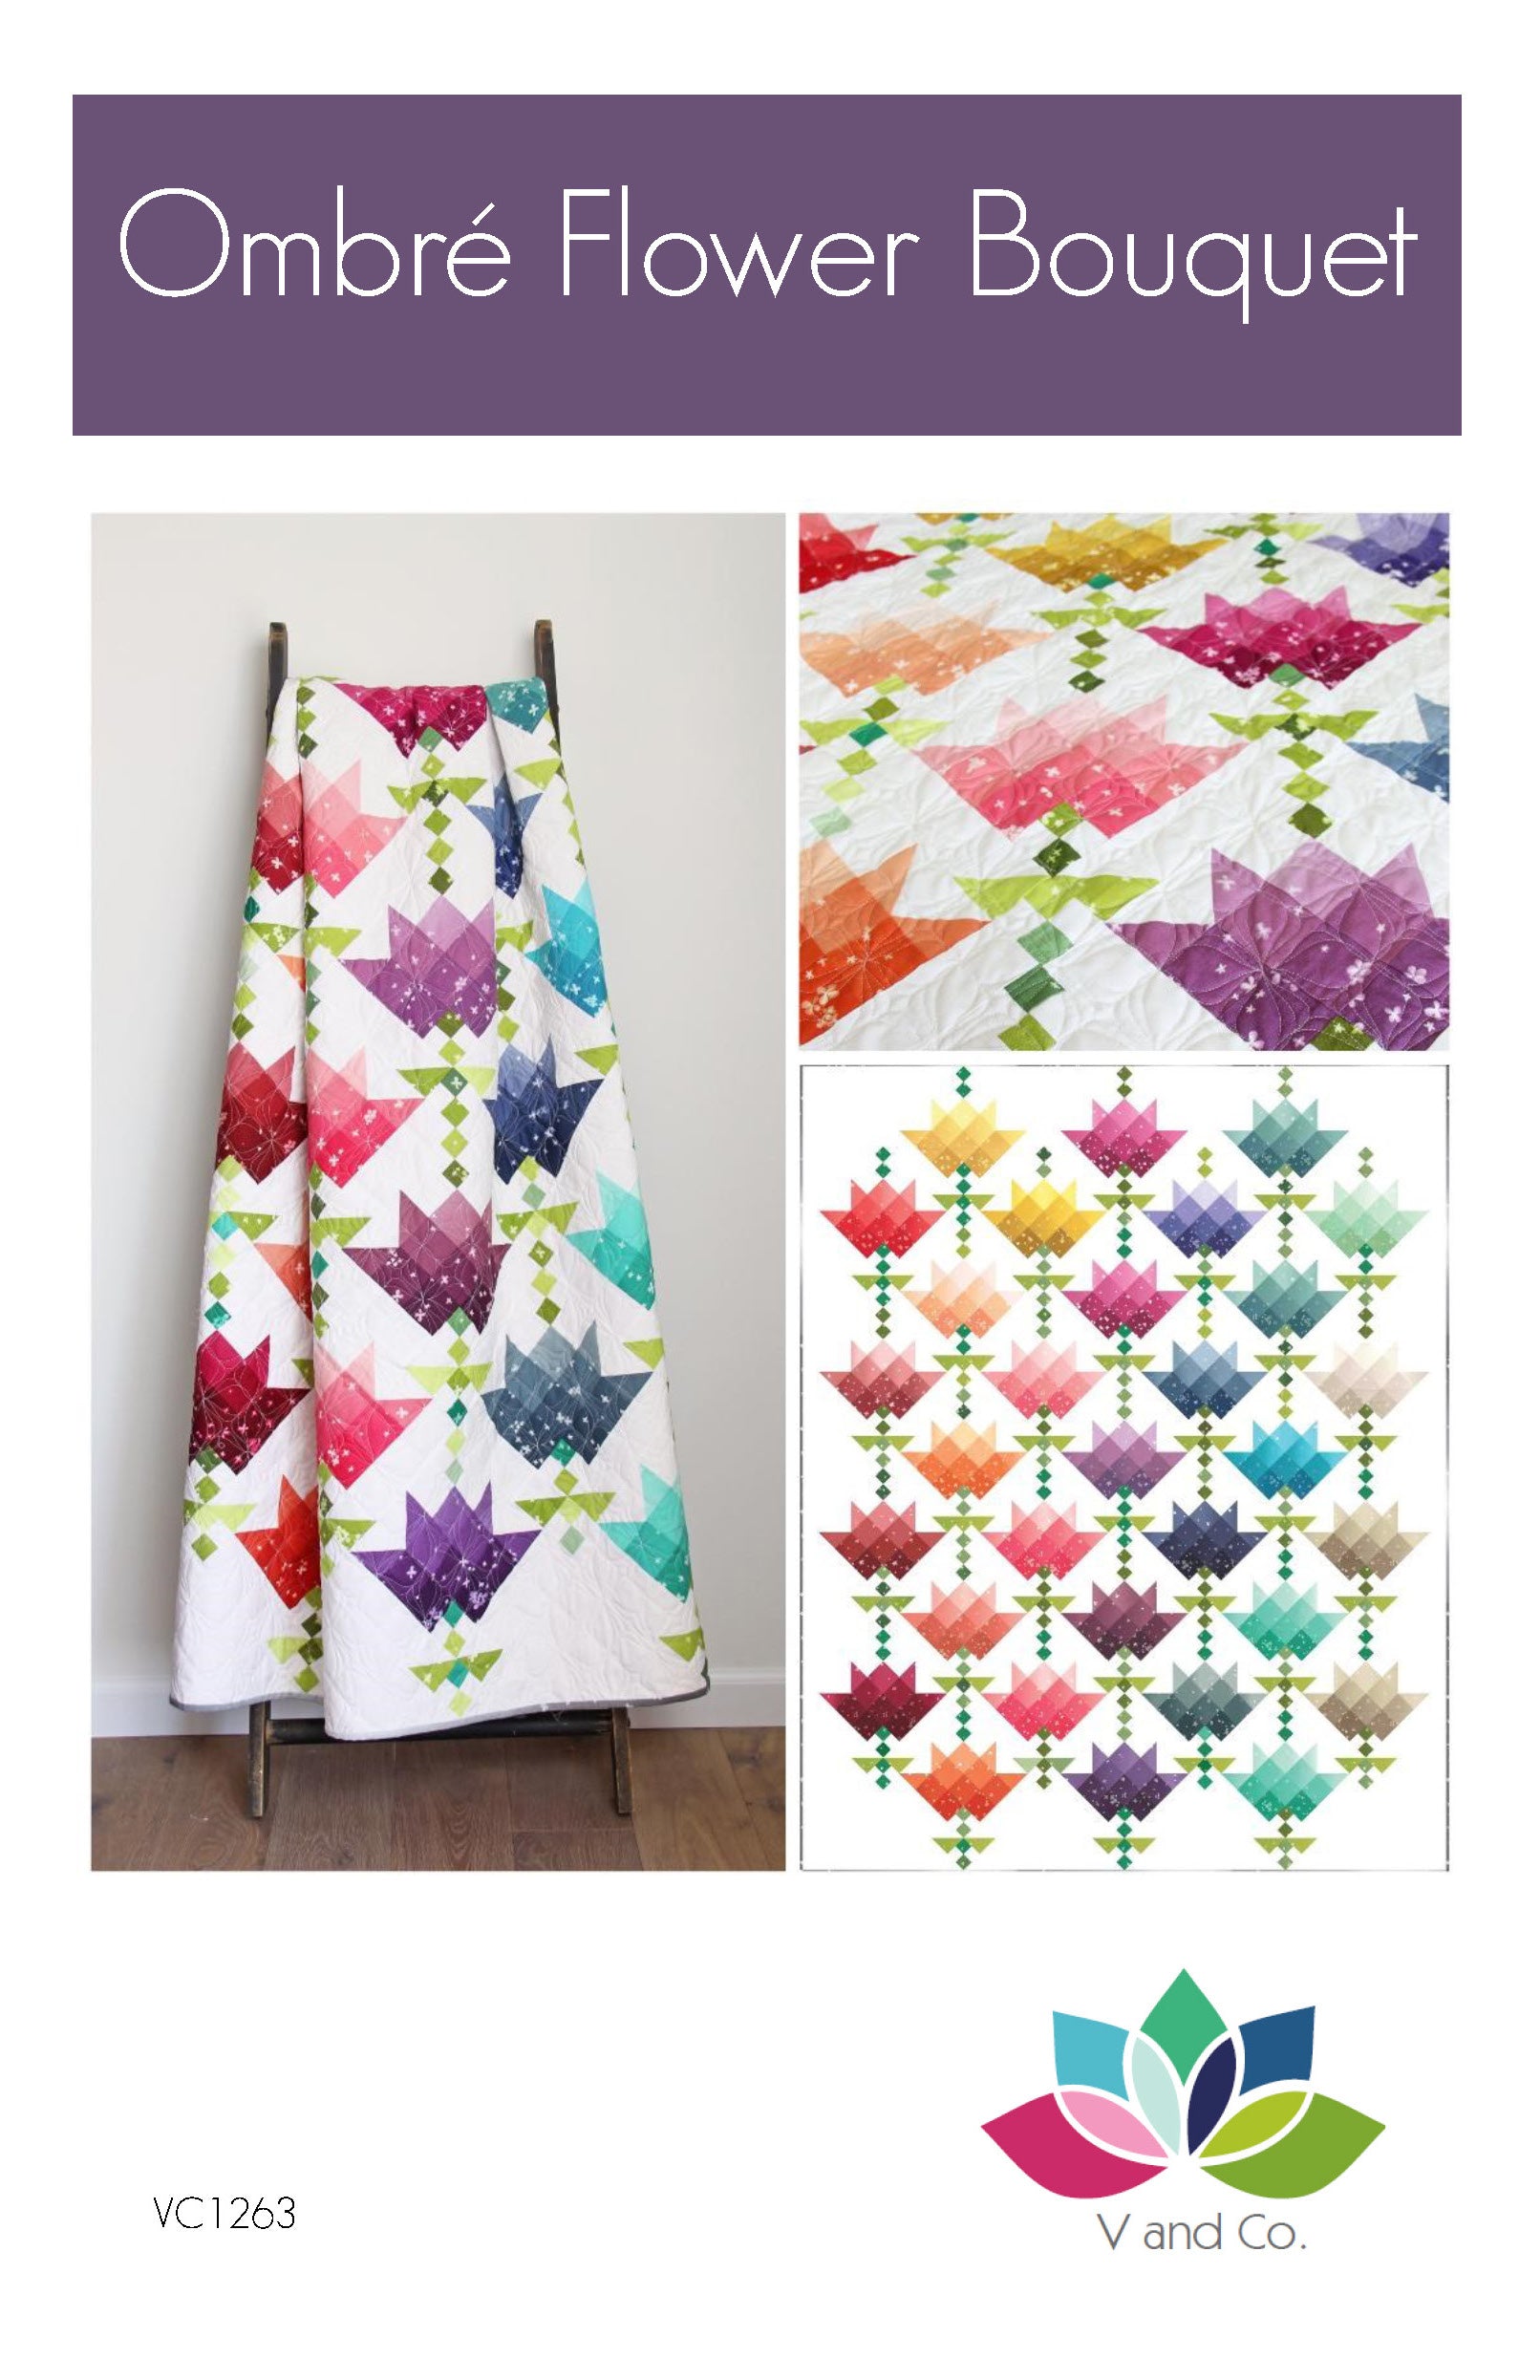 Ombre Flower Bouquet Quilt Pattern by V and Co